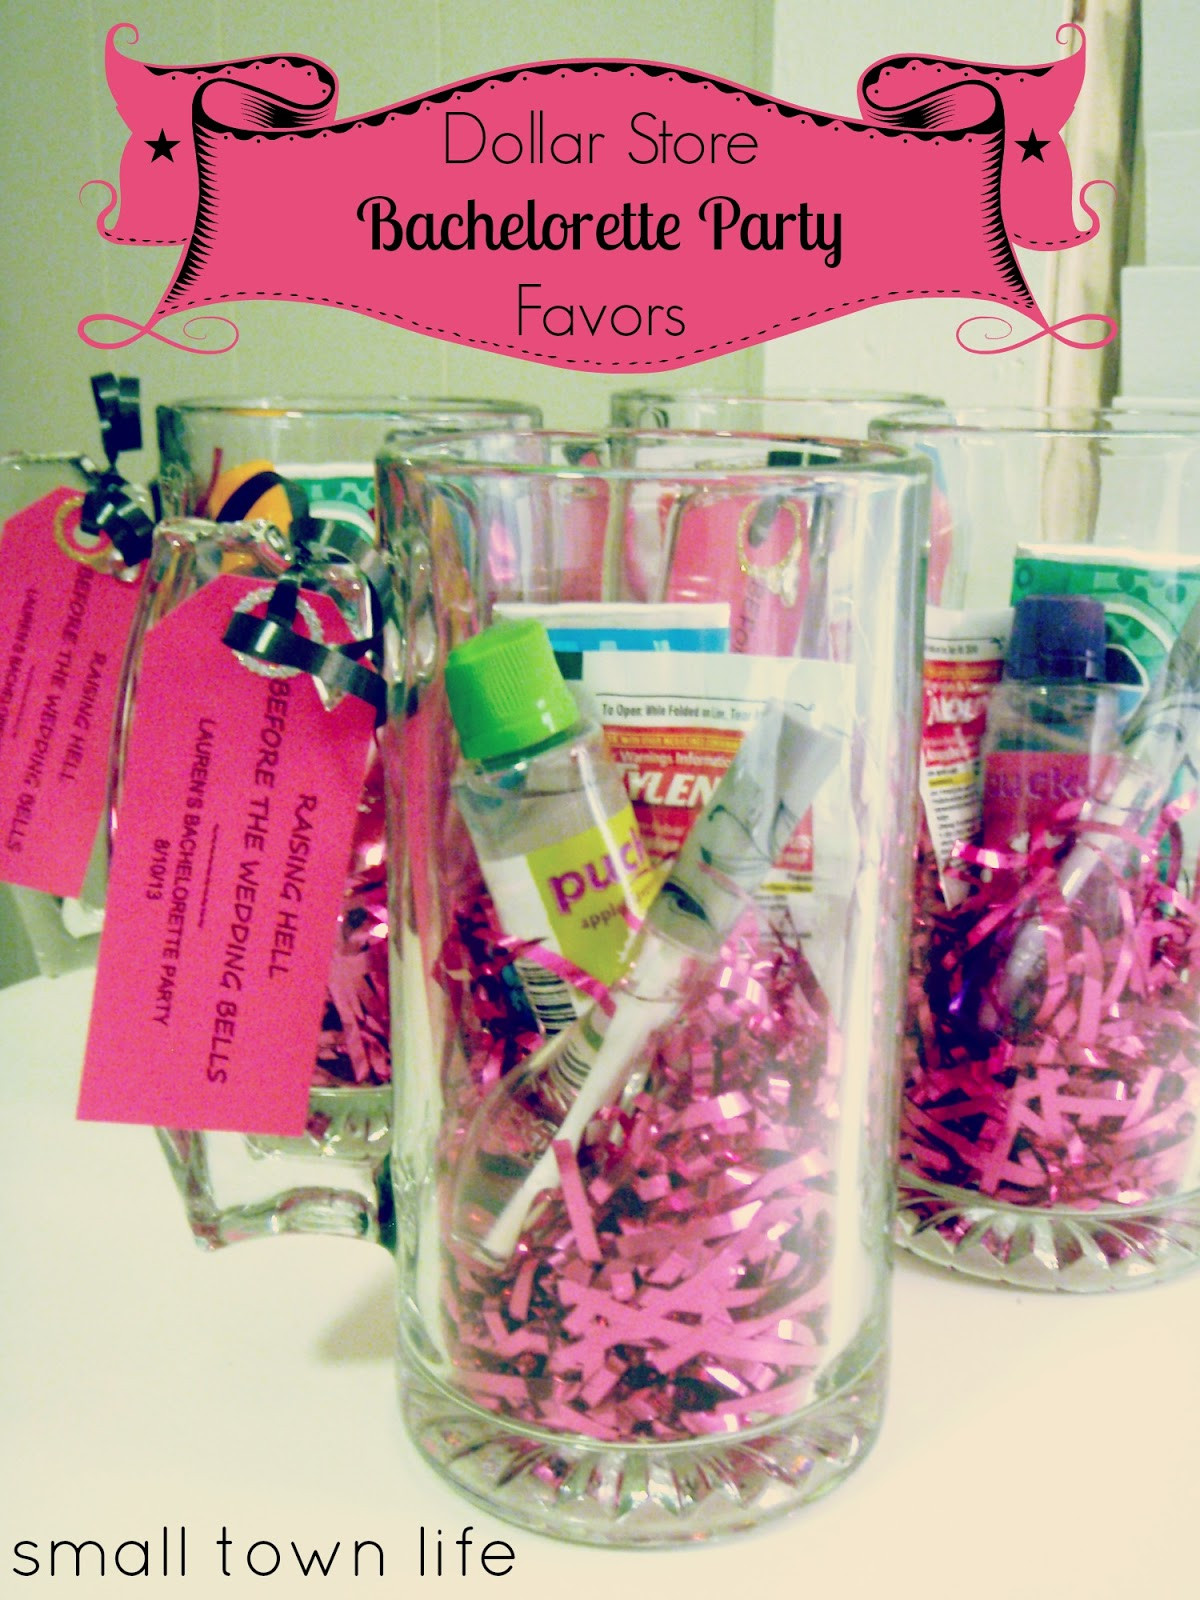 Ideas For Bachelorette Party Gifts
 Small Town Life Dollar Store Bachelorette Party Favors